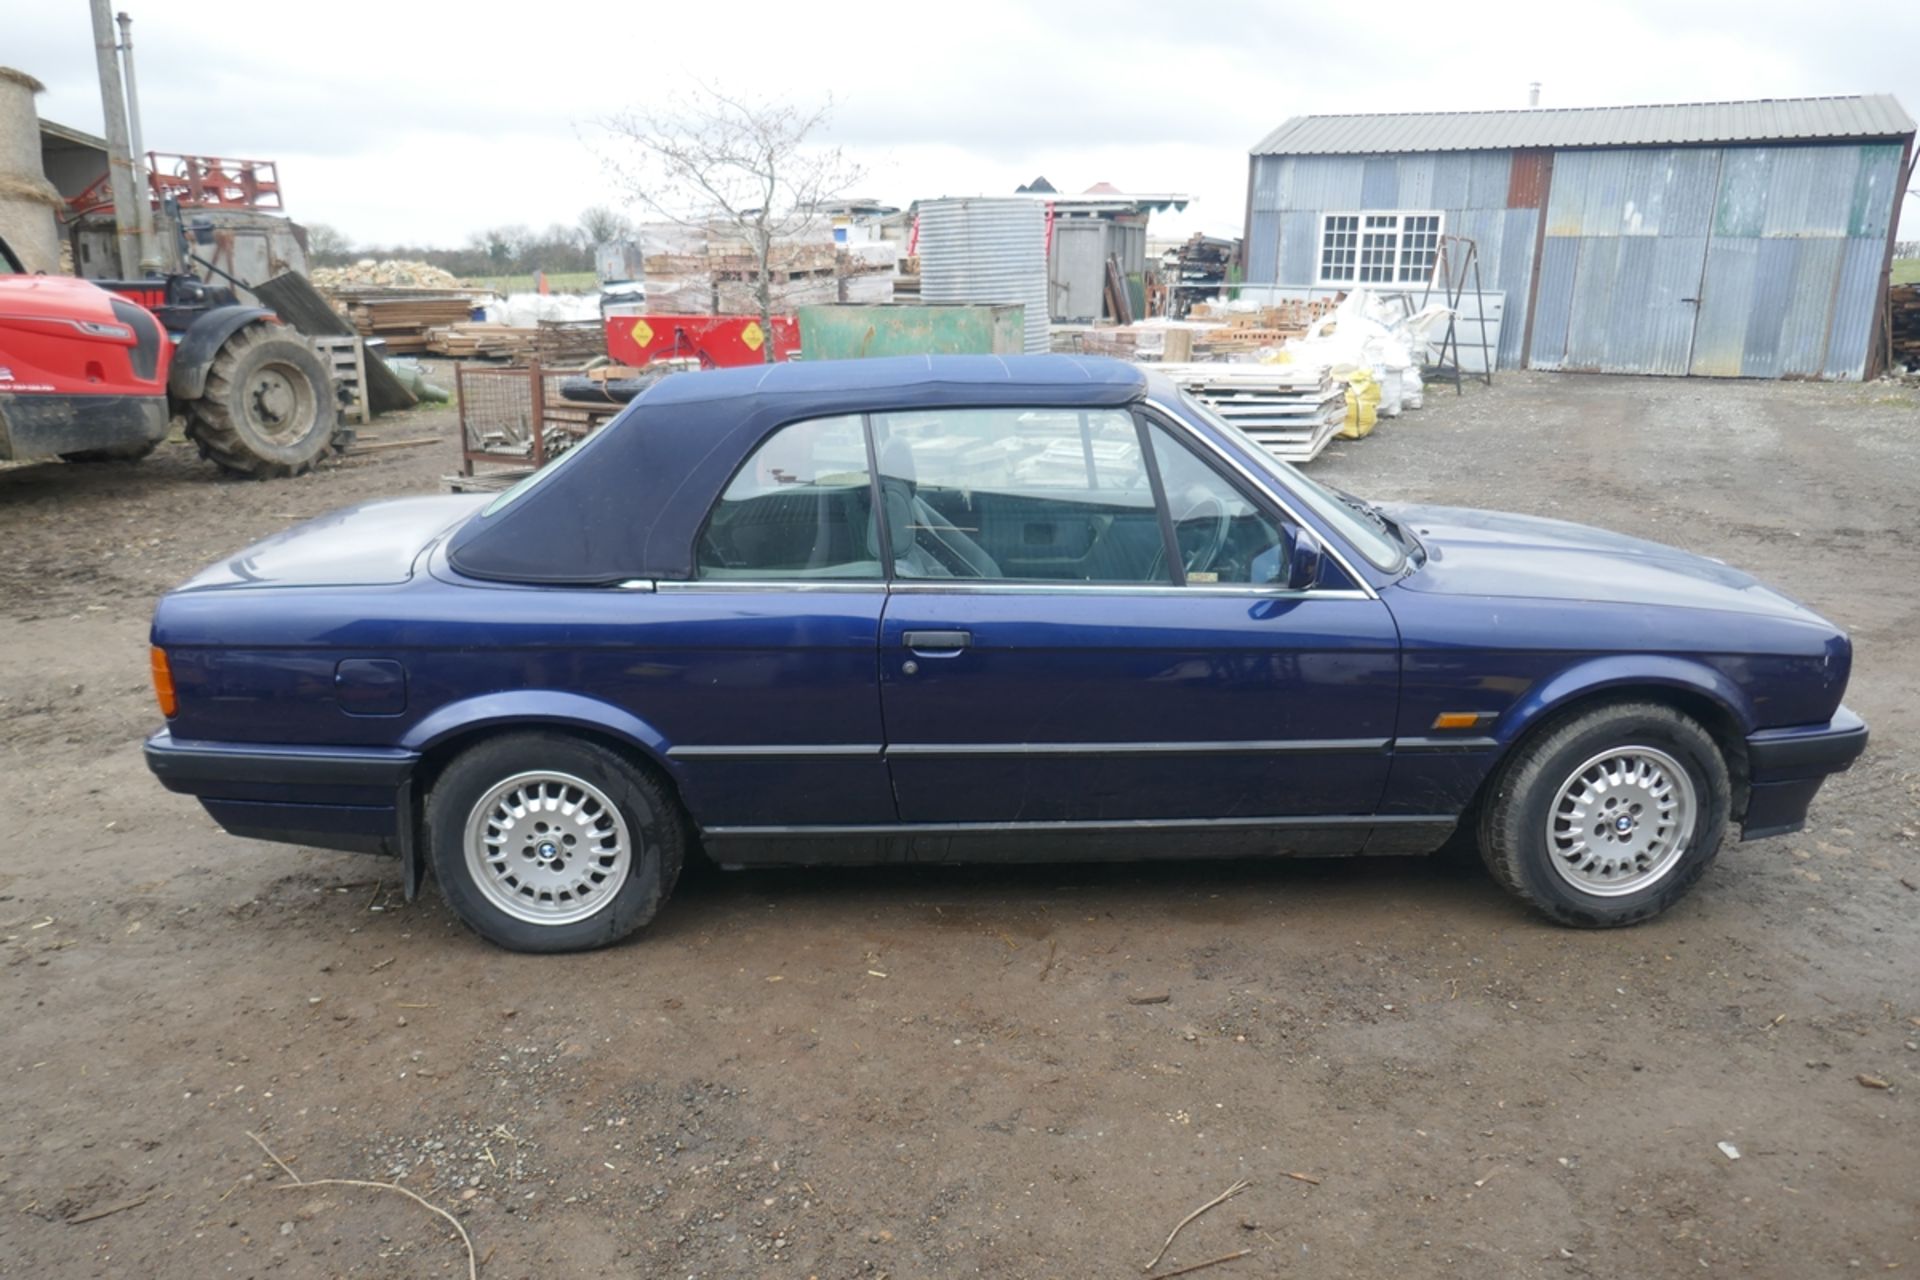 1991 J reg BMW E30 320i Convertible with 74000 miles on the clock, MOT till July - Image 7 of 16